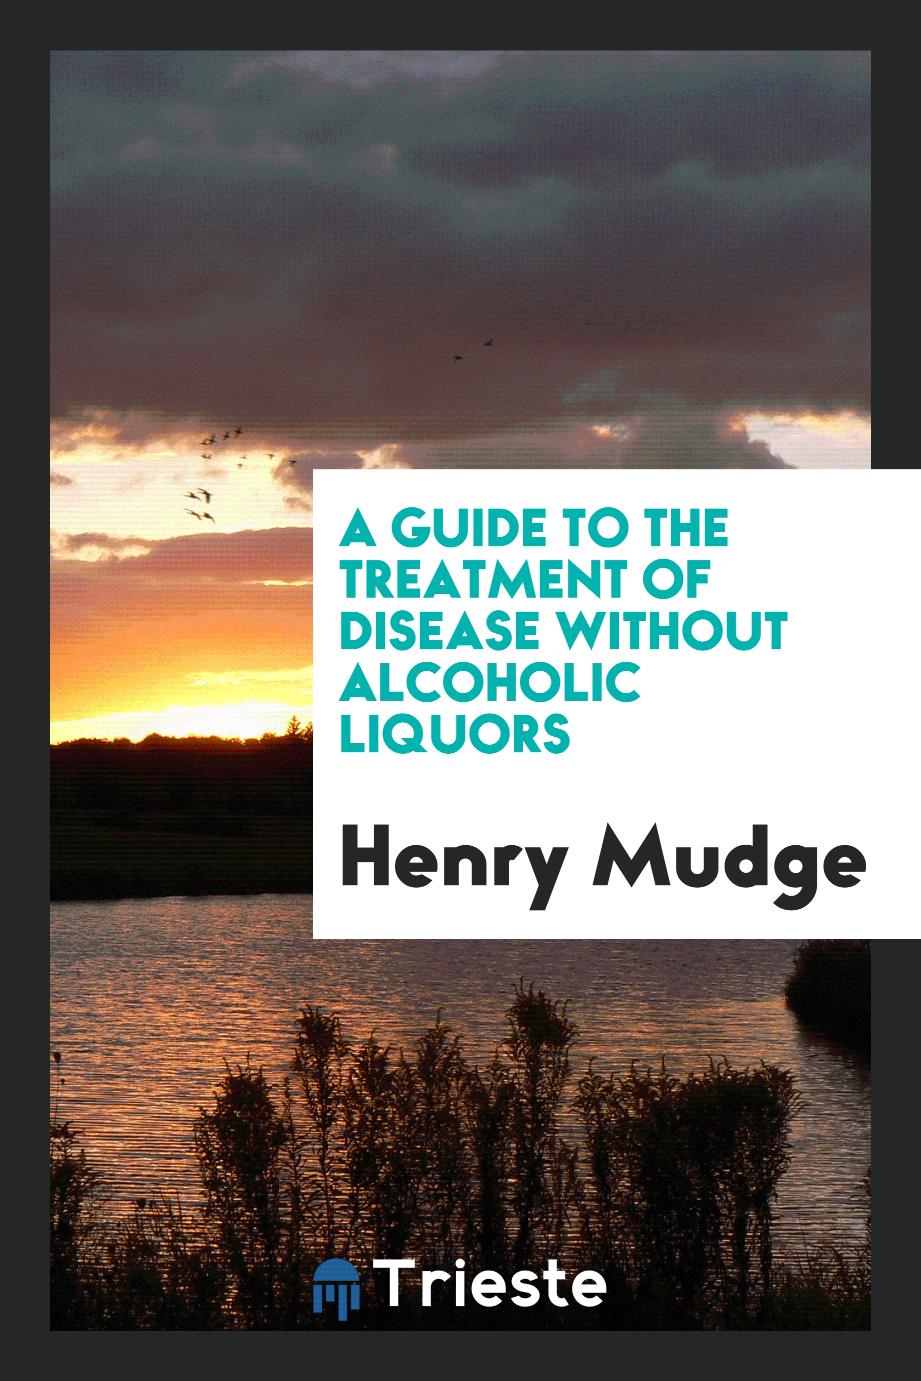 A Guide to the Treatment of Disease without Alcoholic Liquors